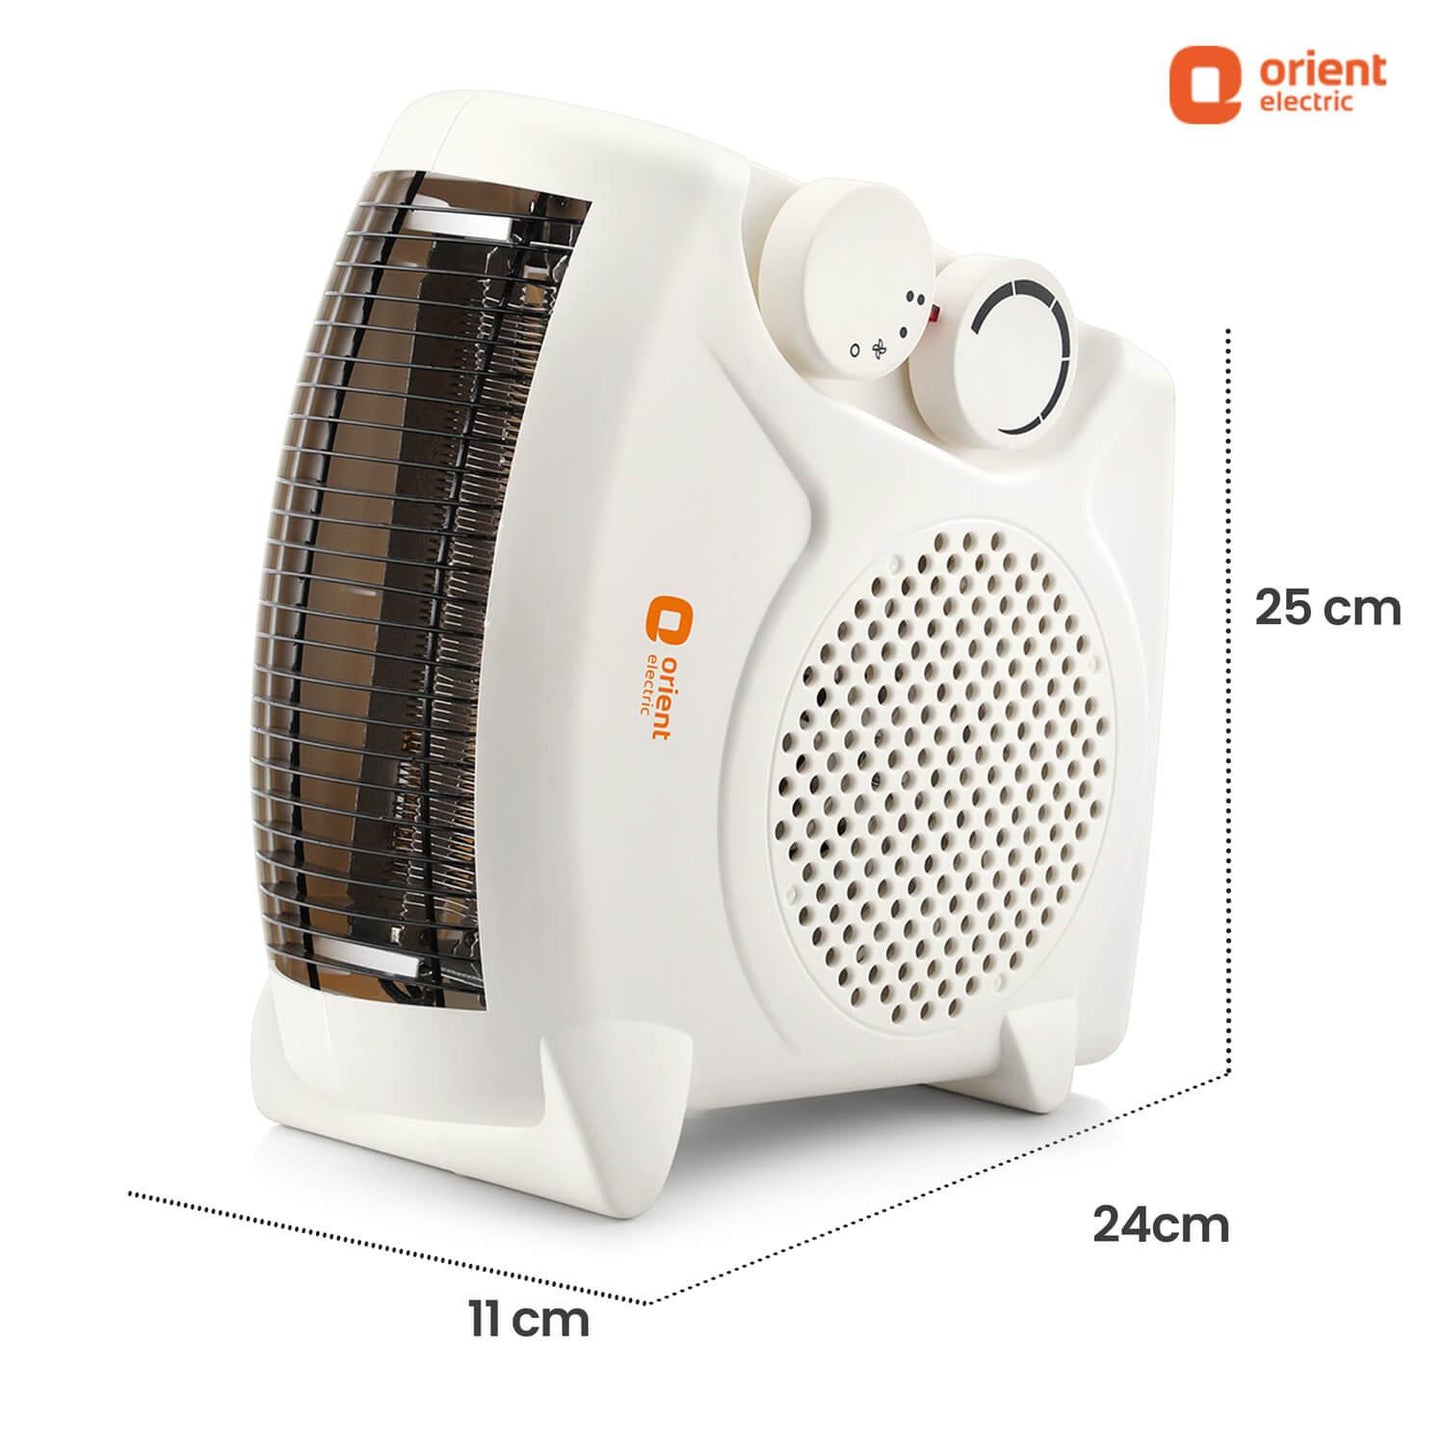 Areva Blower Room Heater with Adjustable Wattage (1000W-2000W) - Orient Electric